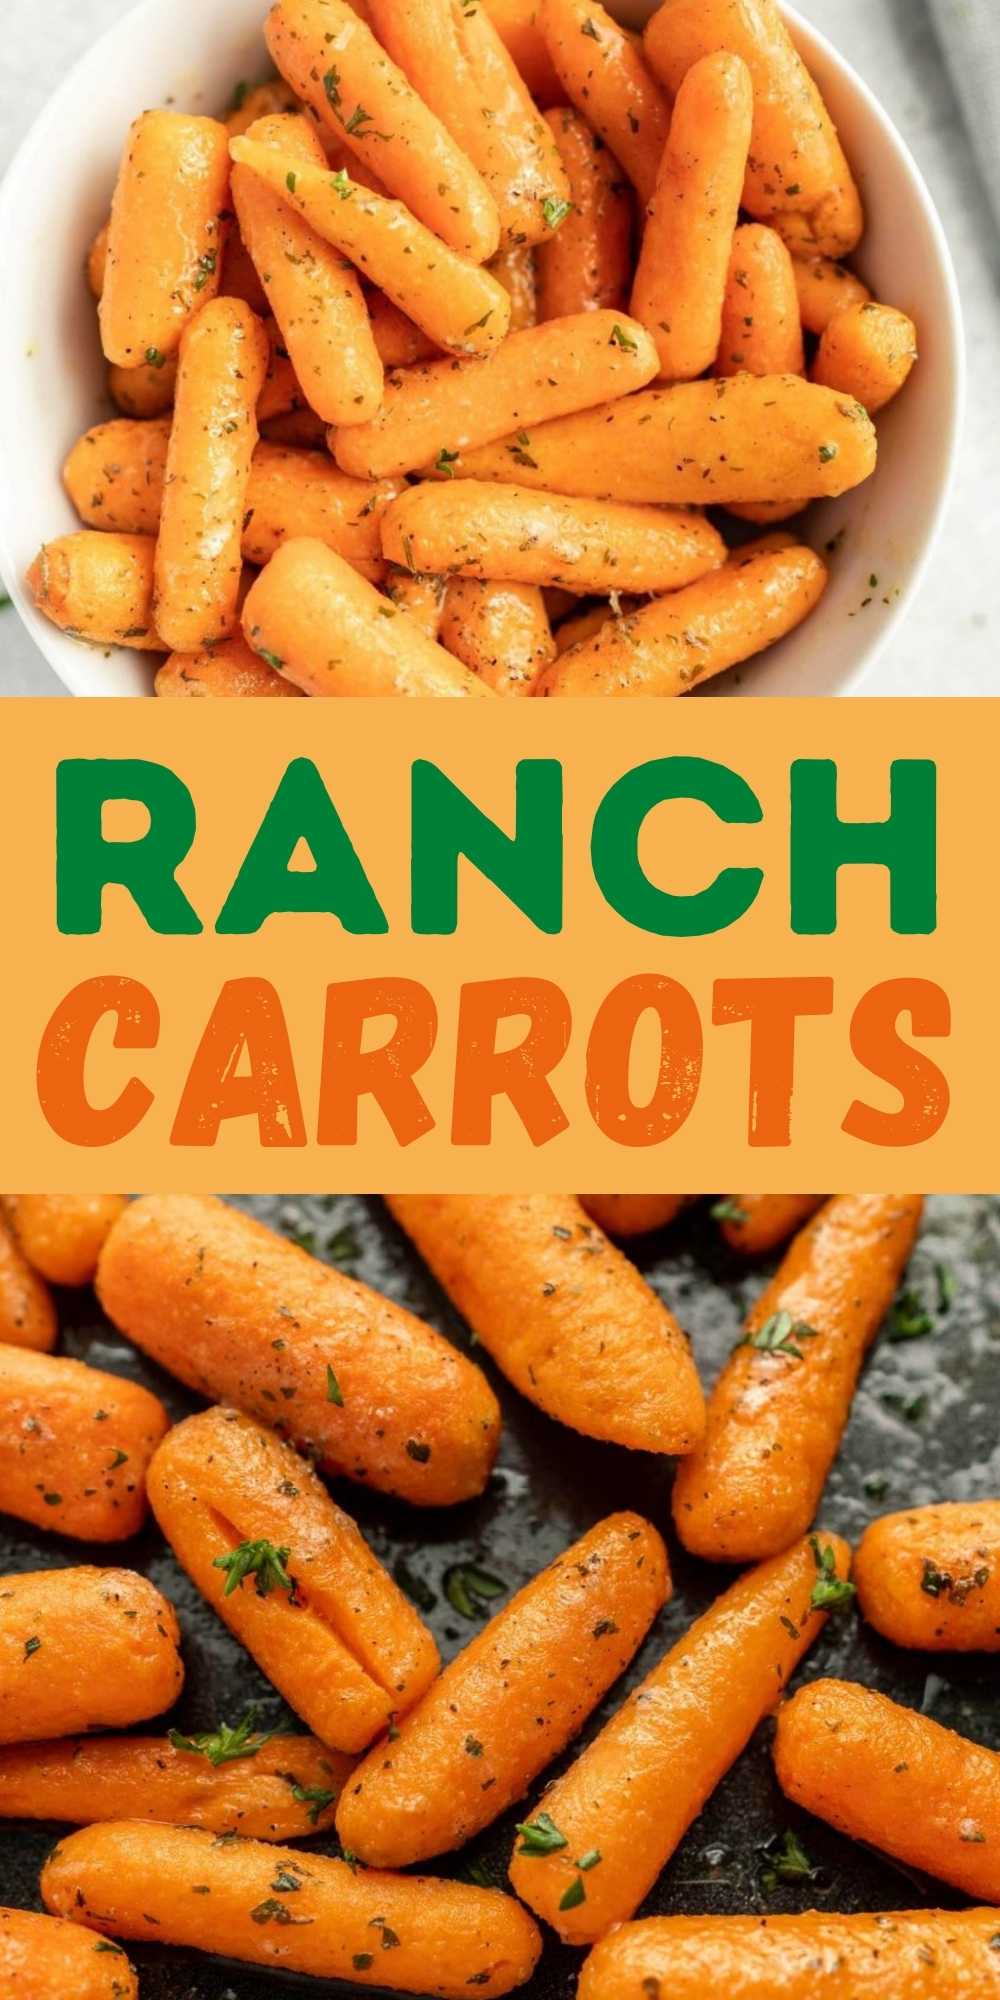 Ranch Carrots recipe is baked to perfection and loaded with ranch flavor. It is the perfect side dish without much prep work. Get this on the table in less than 20 minutes. Hidden Valley Ranch gives the perfect amount of seasoning to these carrots. #eatingonadime #ranchcarrots #sidedishrecipe